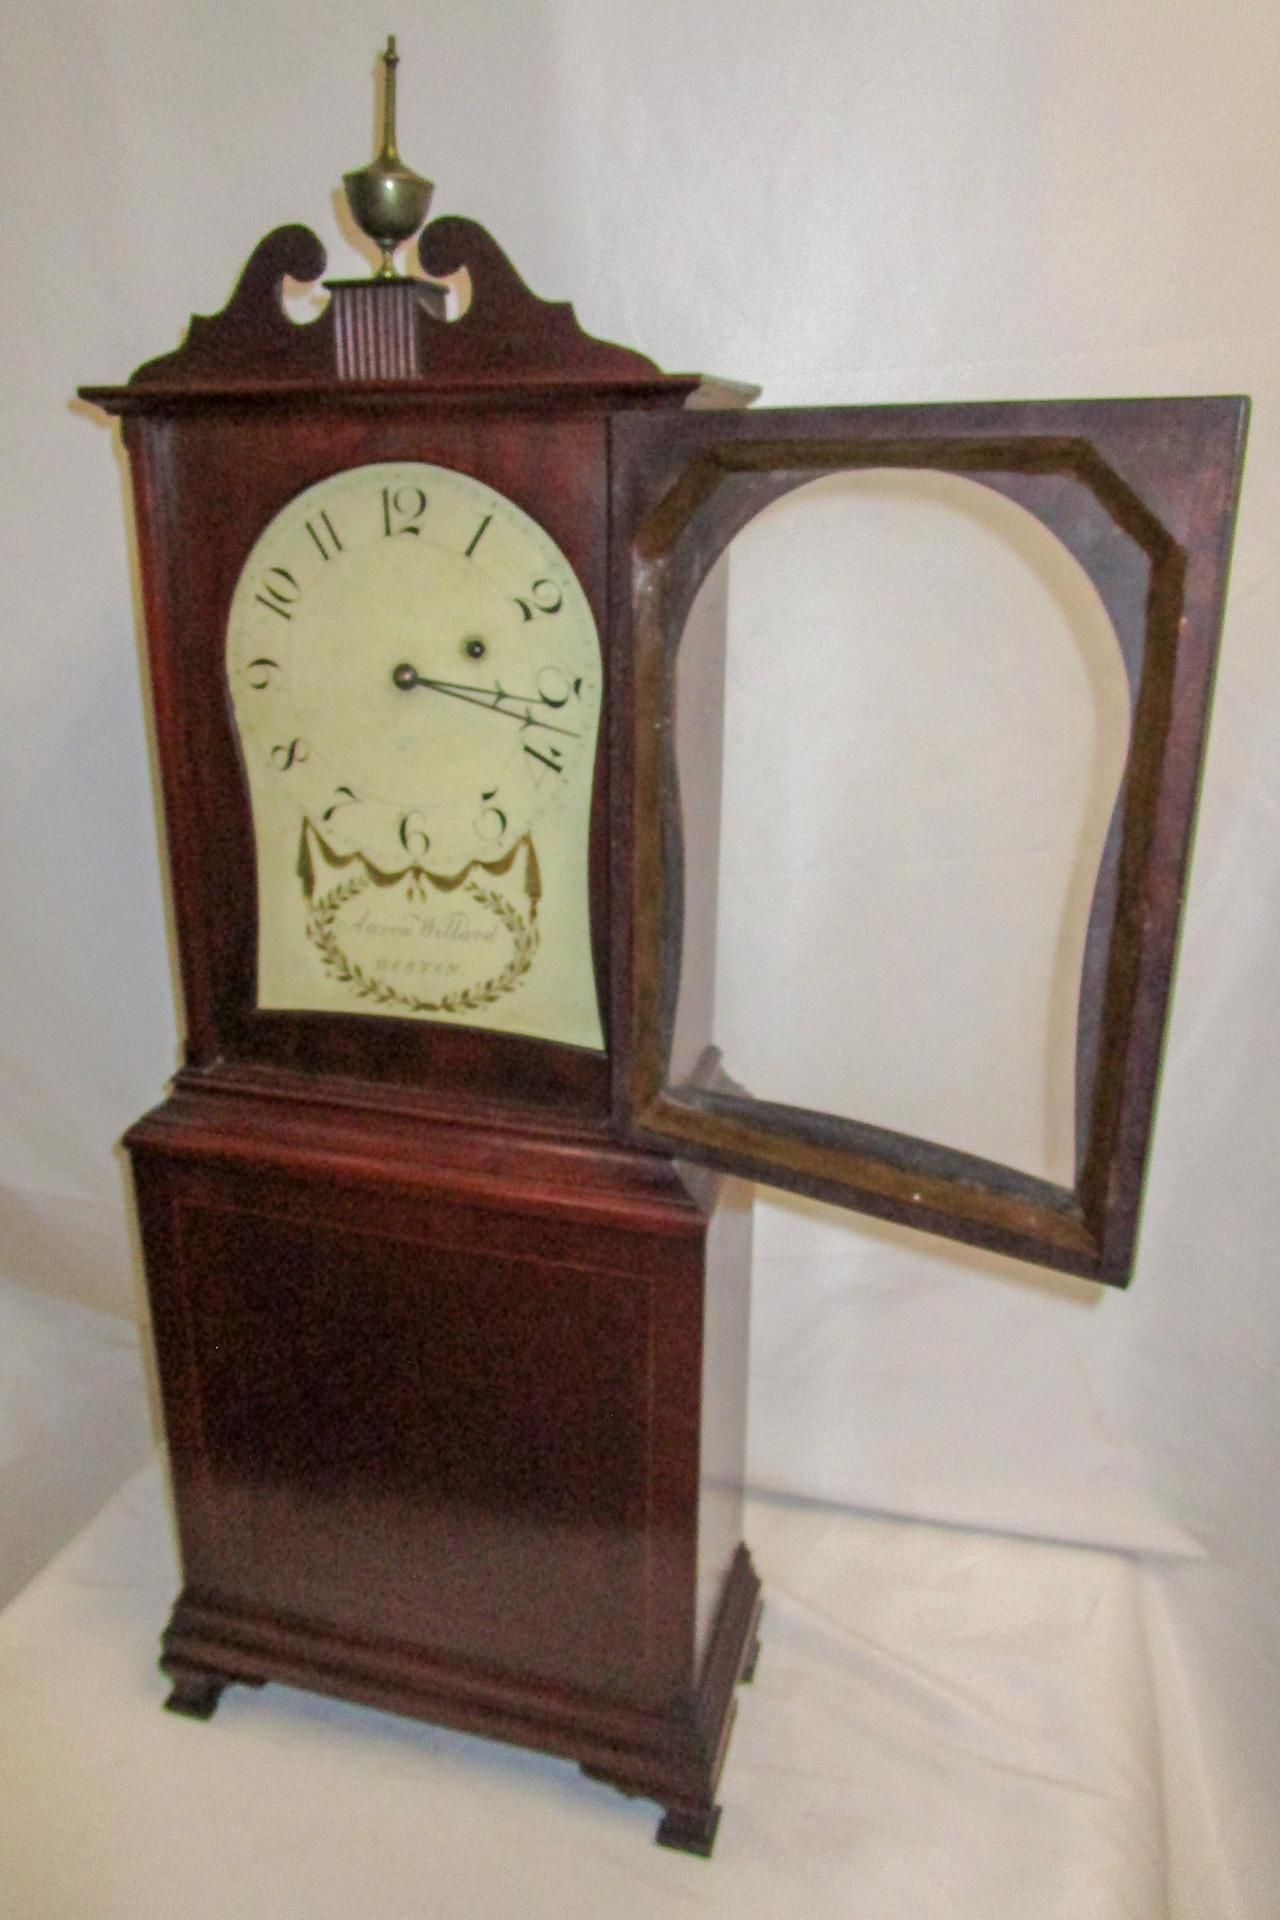 This magnificent shelf clock has an arched and inlaid pediment over a painted dial that is signed 